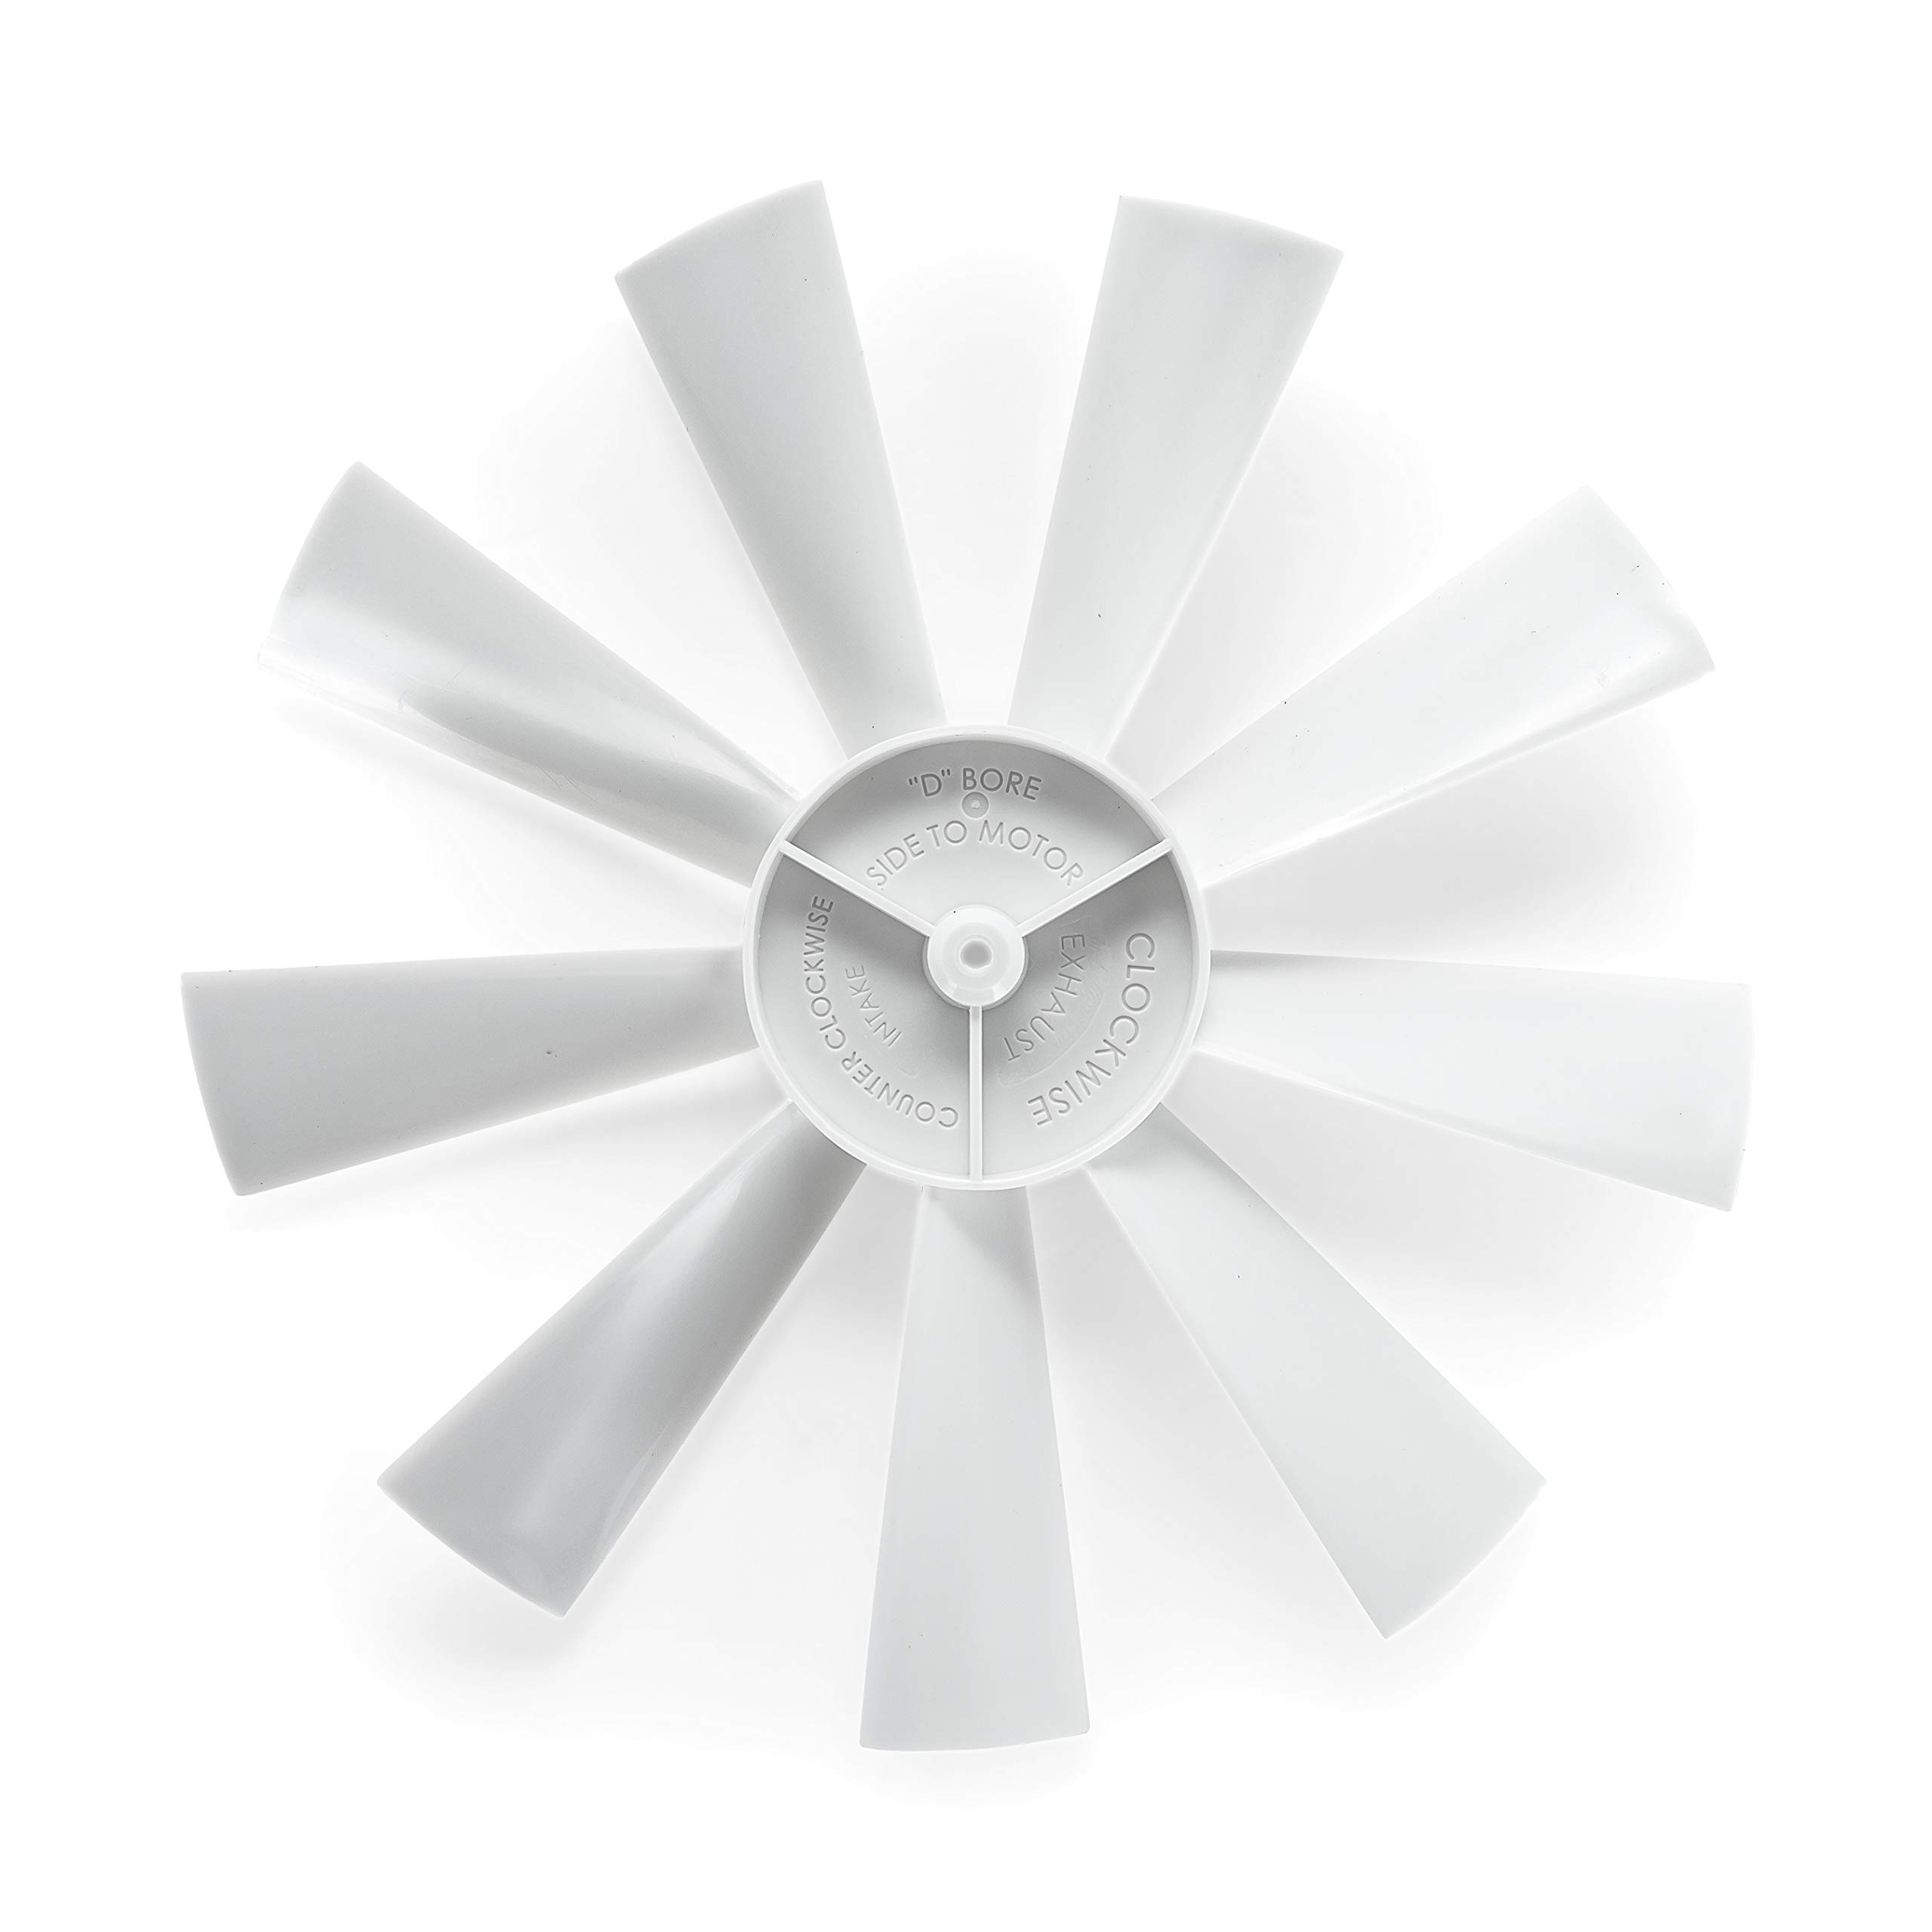 REPLACEMENT VENT FAN BLADE COUNTER CLOCKWISE